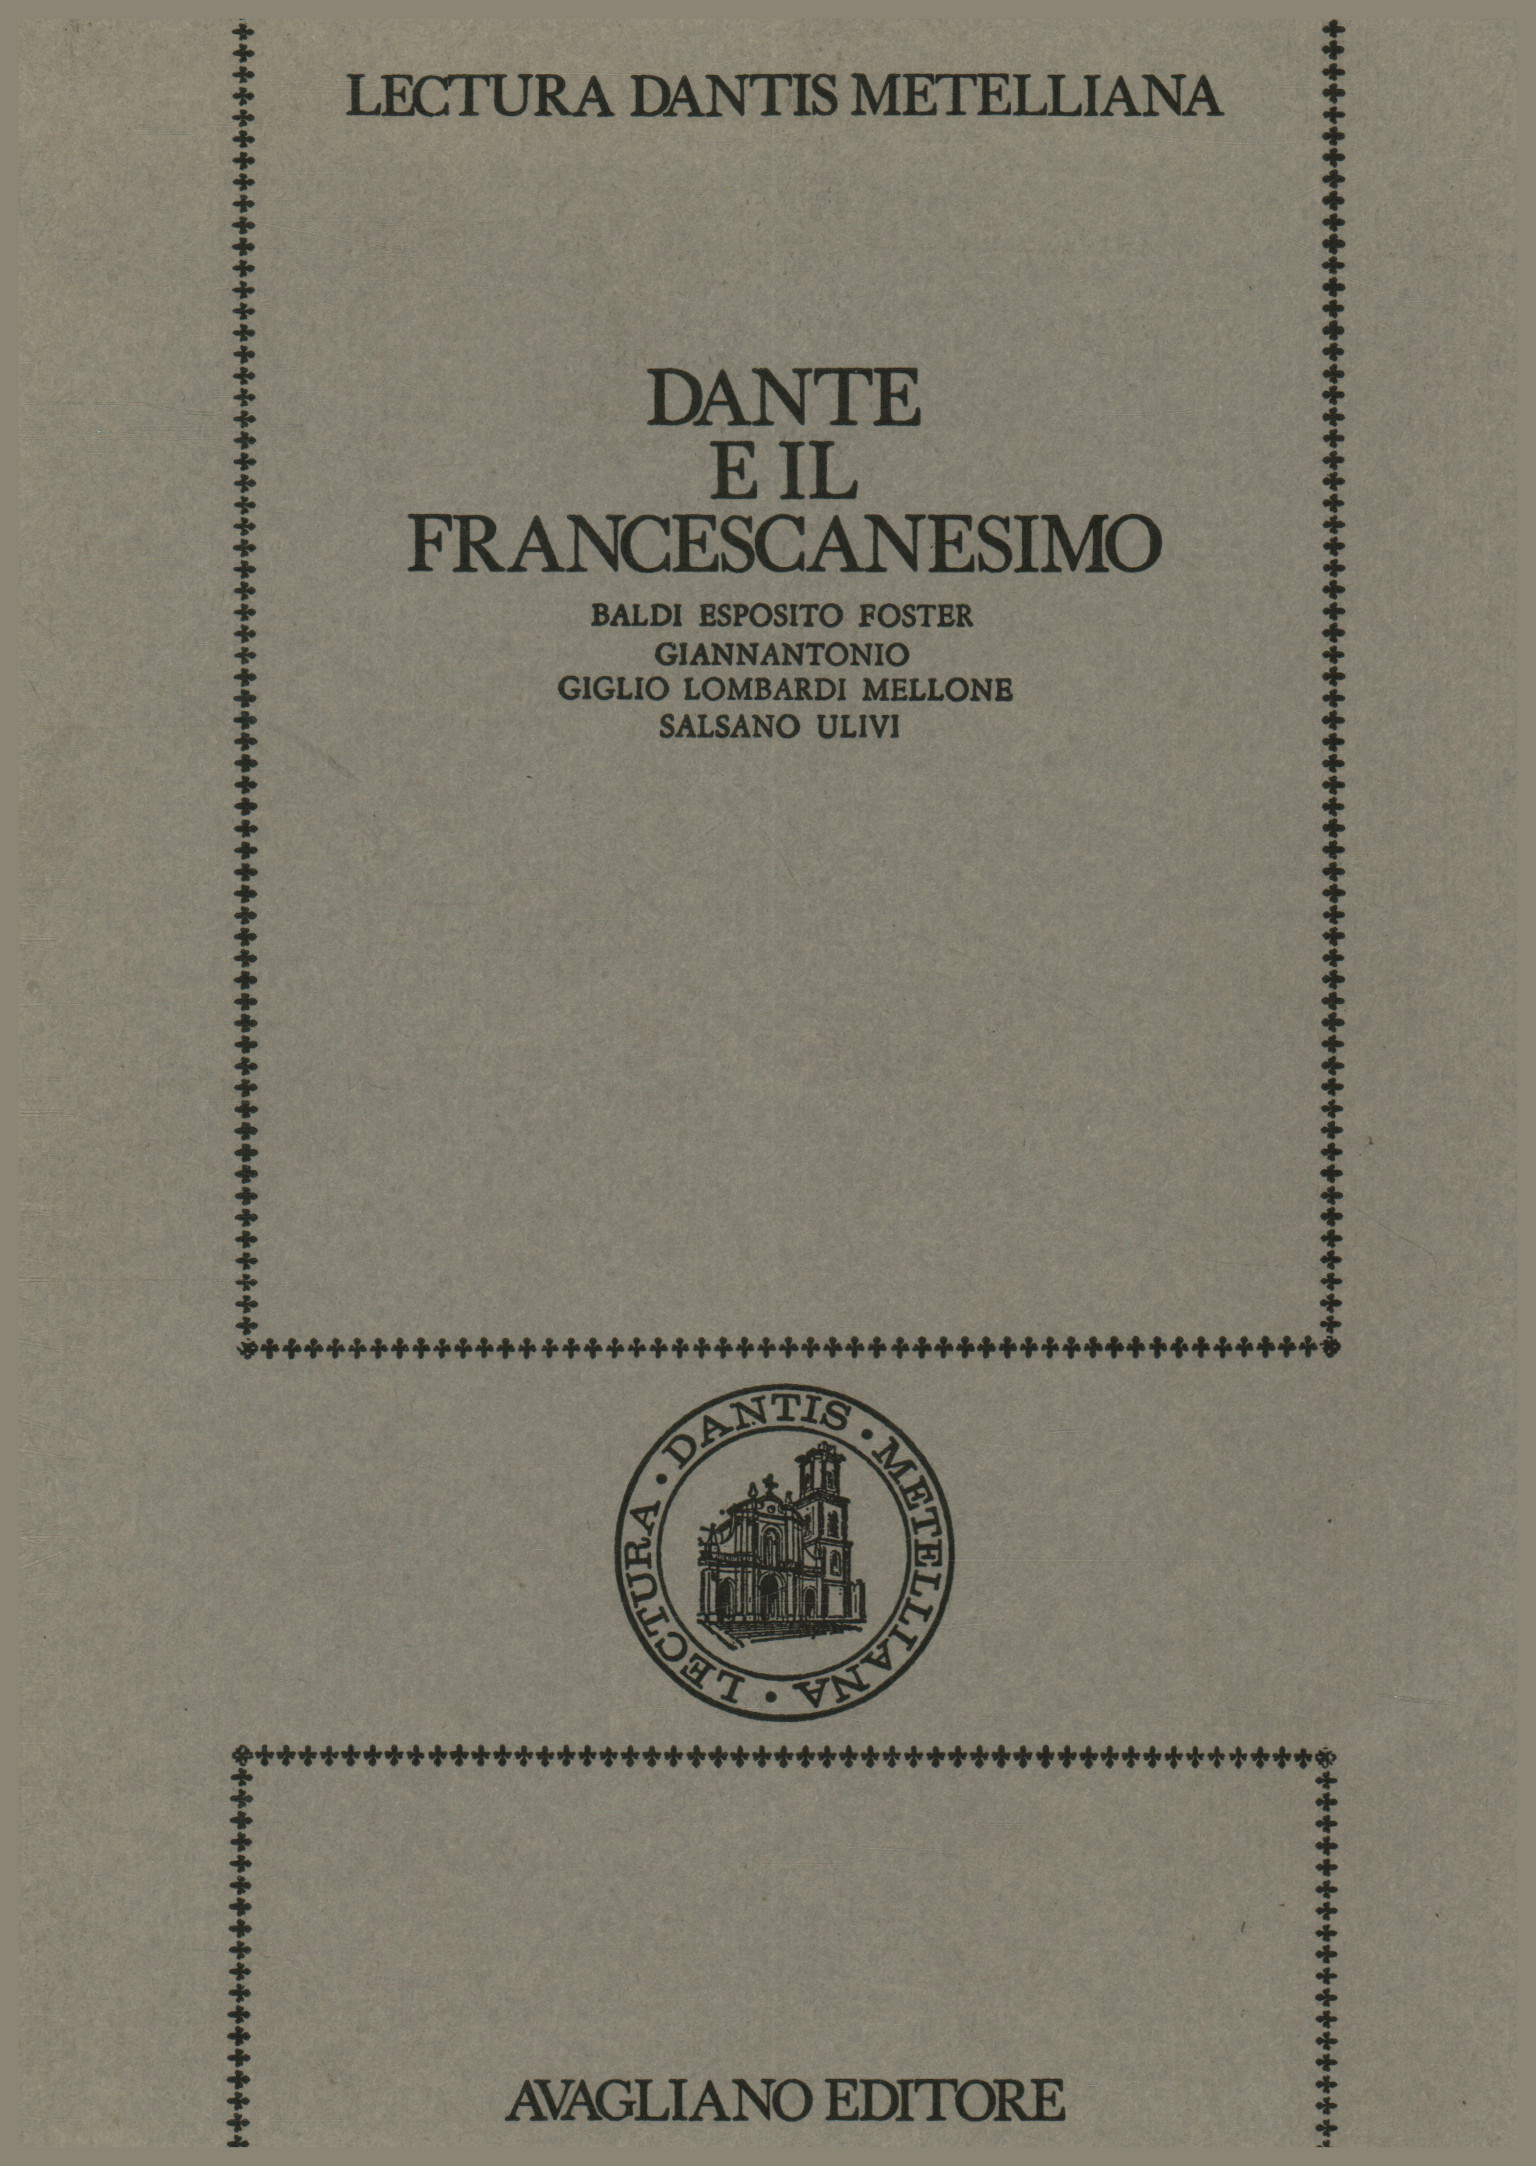 Dante and Franciscanism